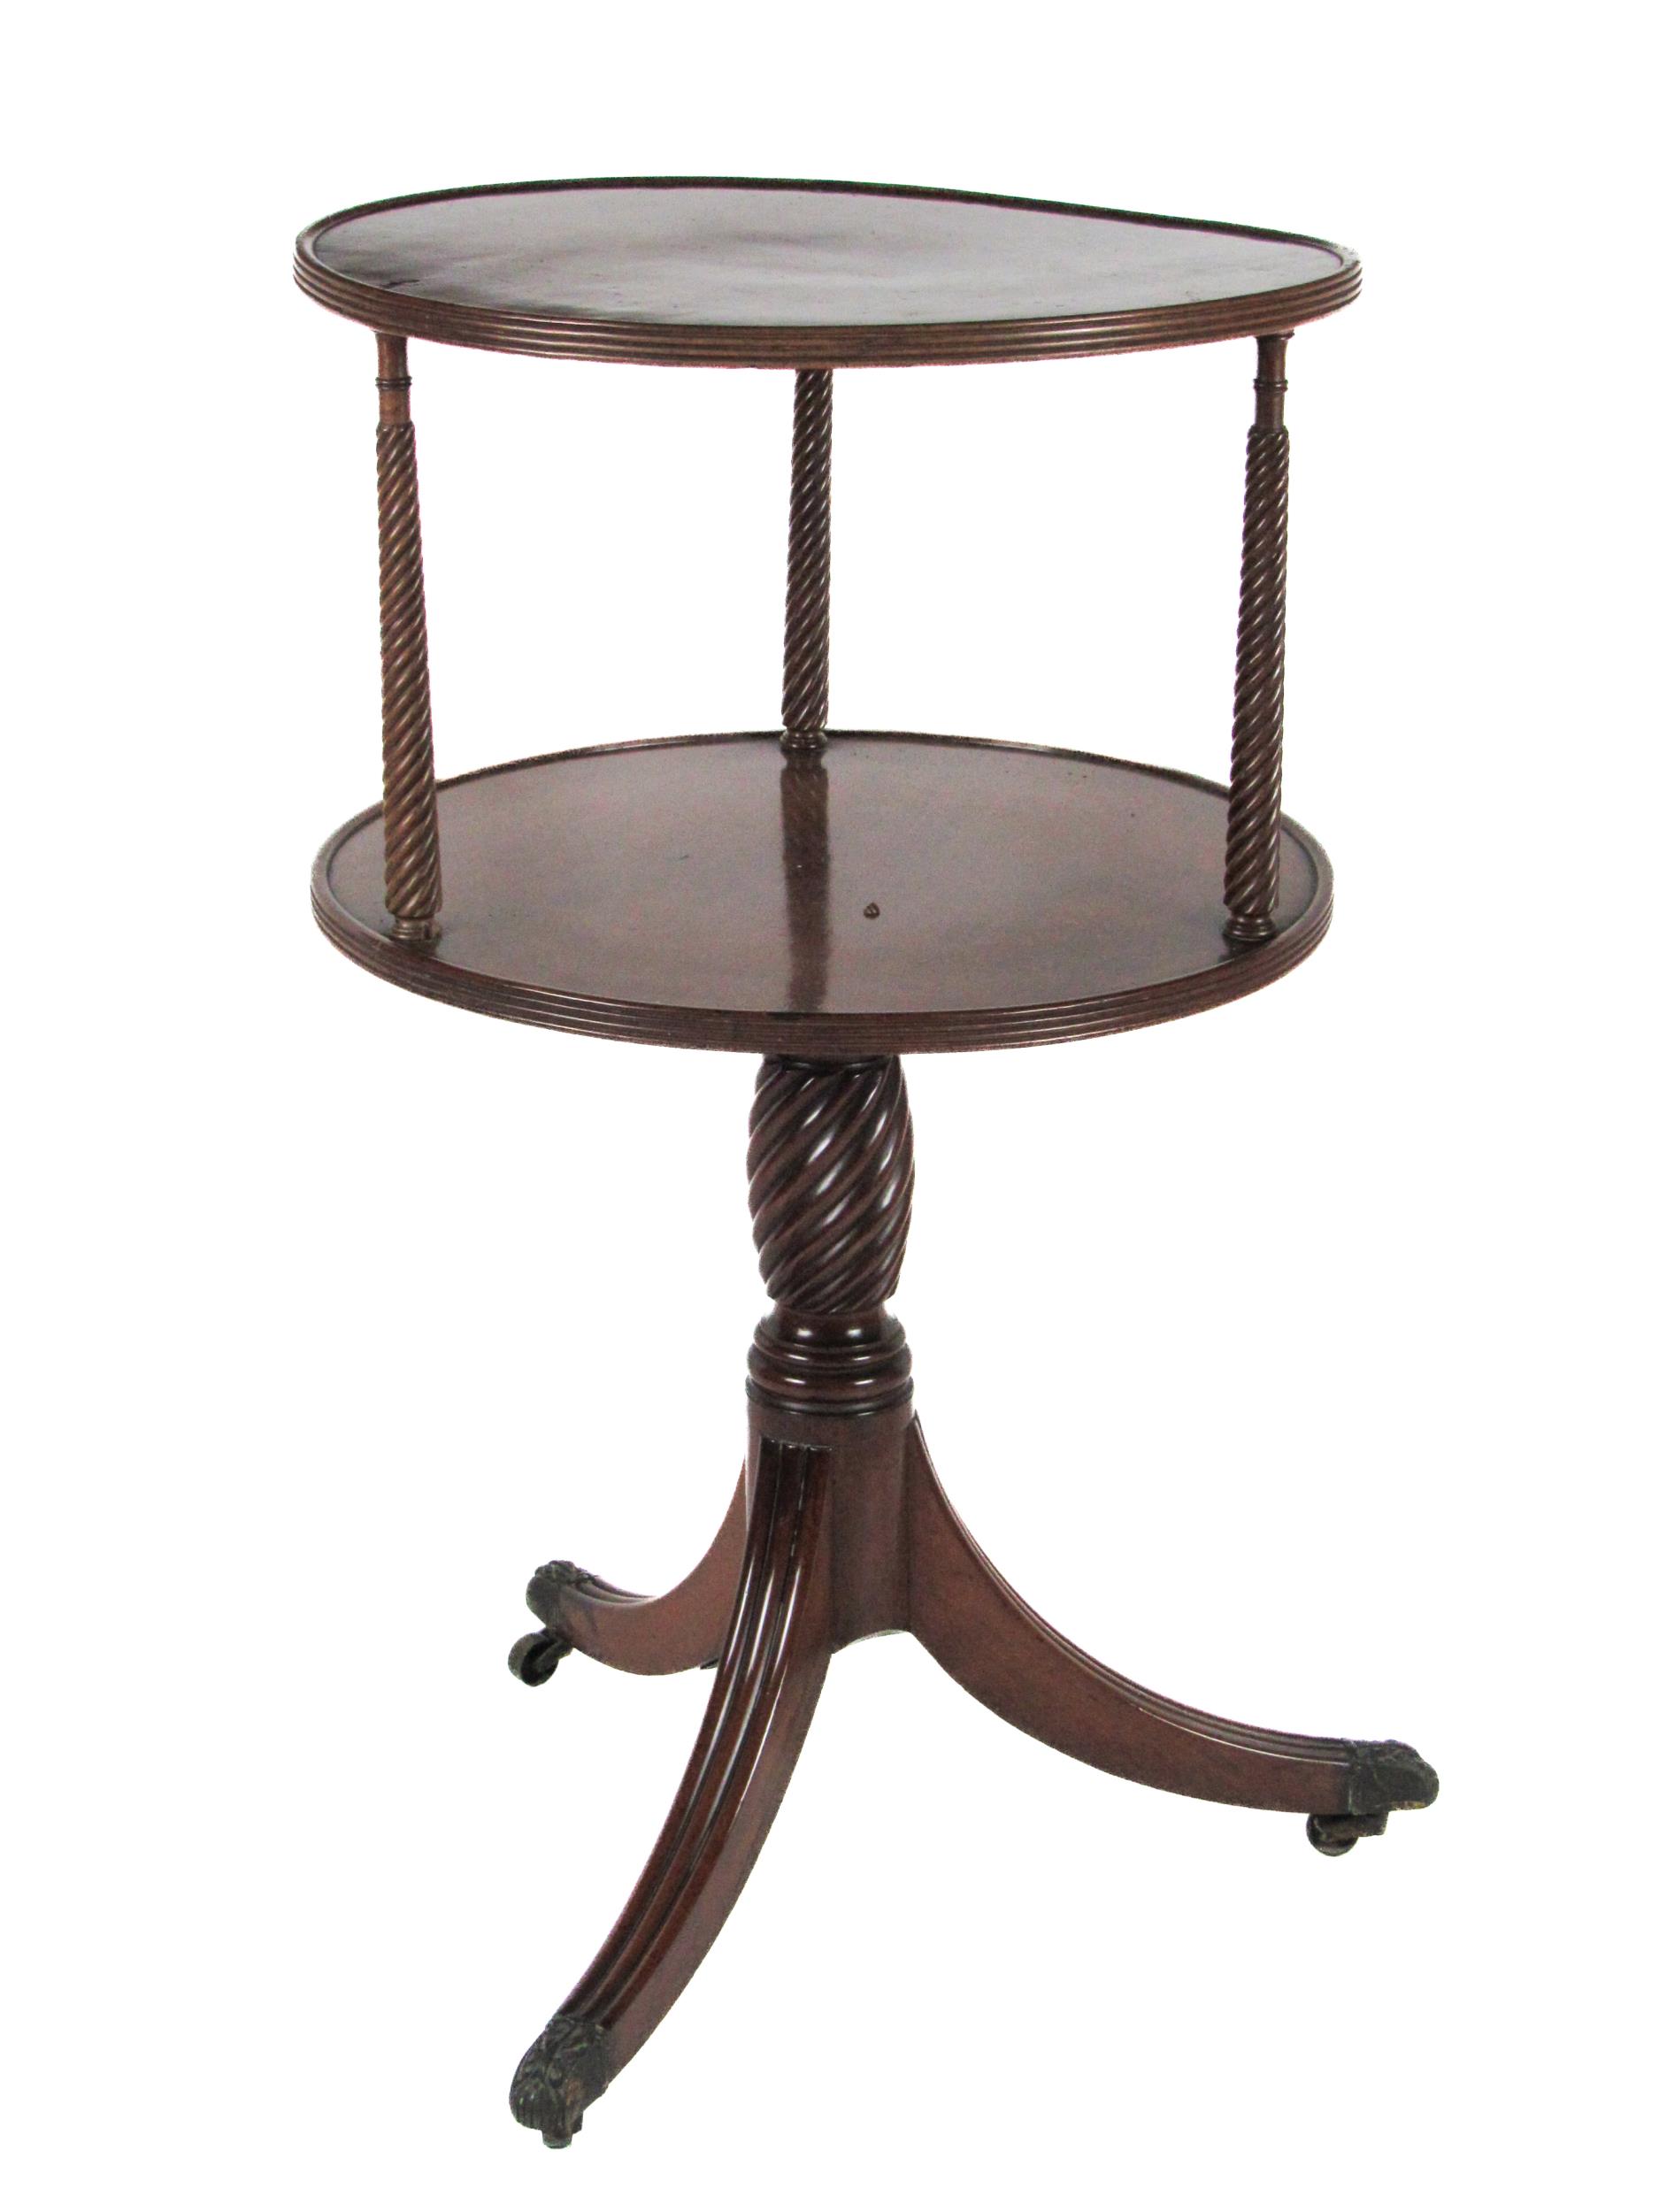 A fine quality 19th Century circular two tier Dumbwaiter, with reeded edge support, on a heavy